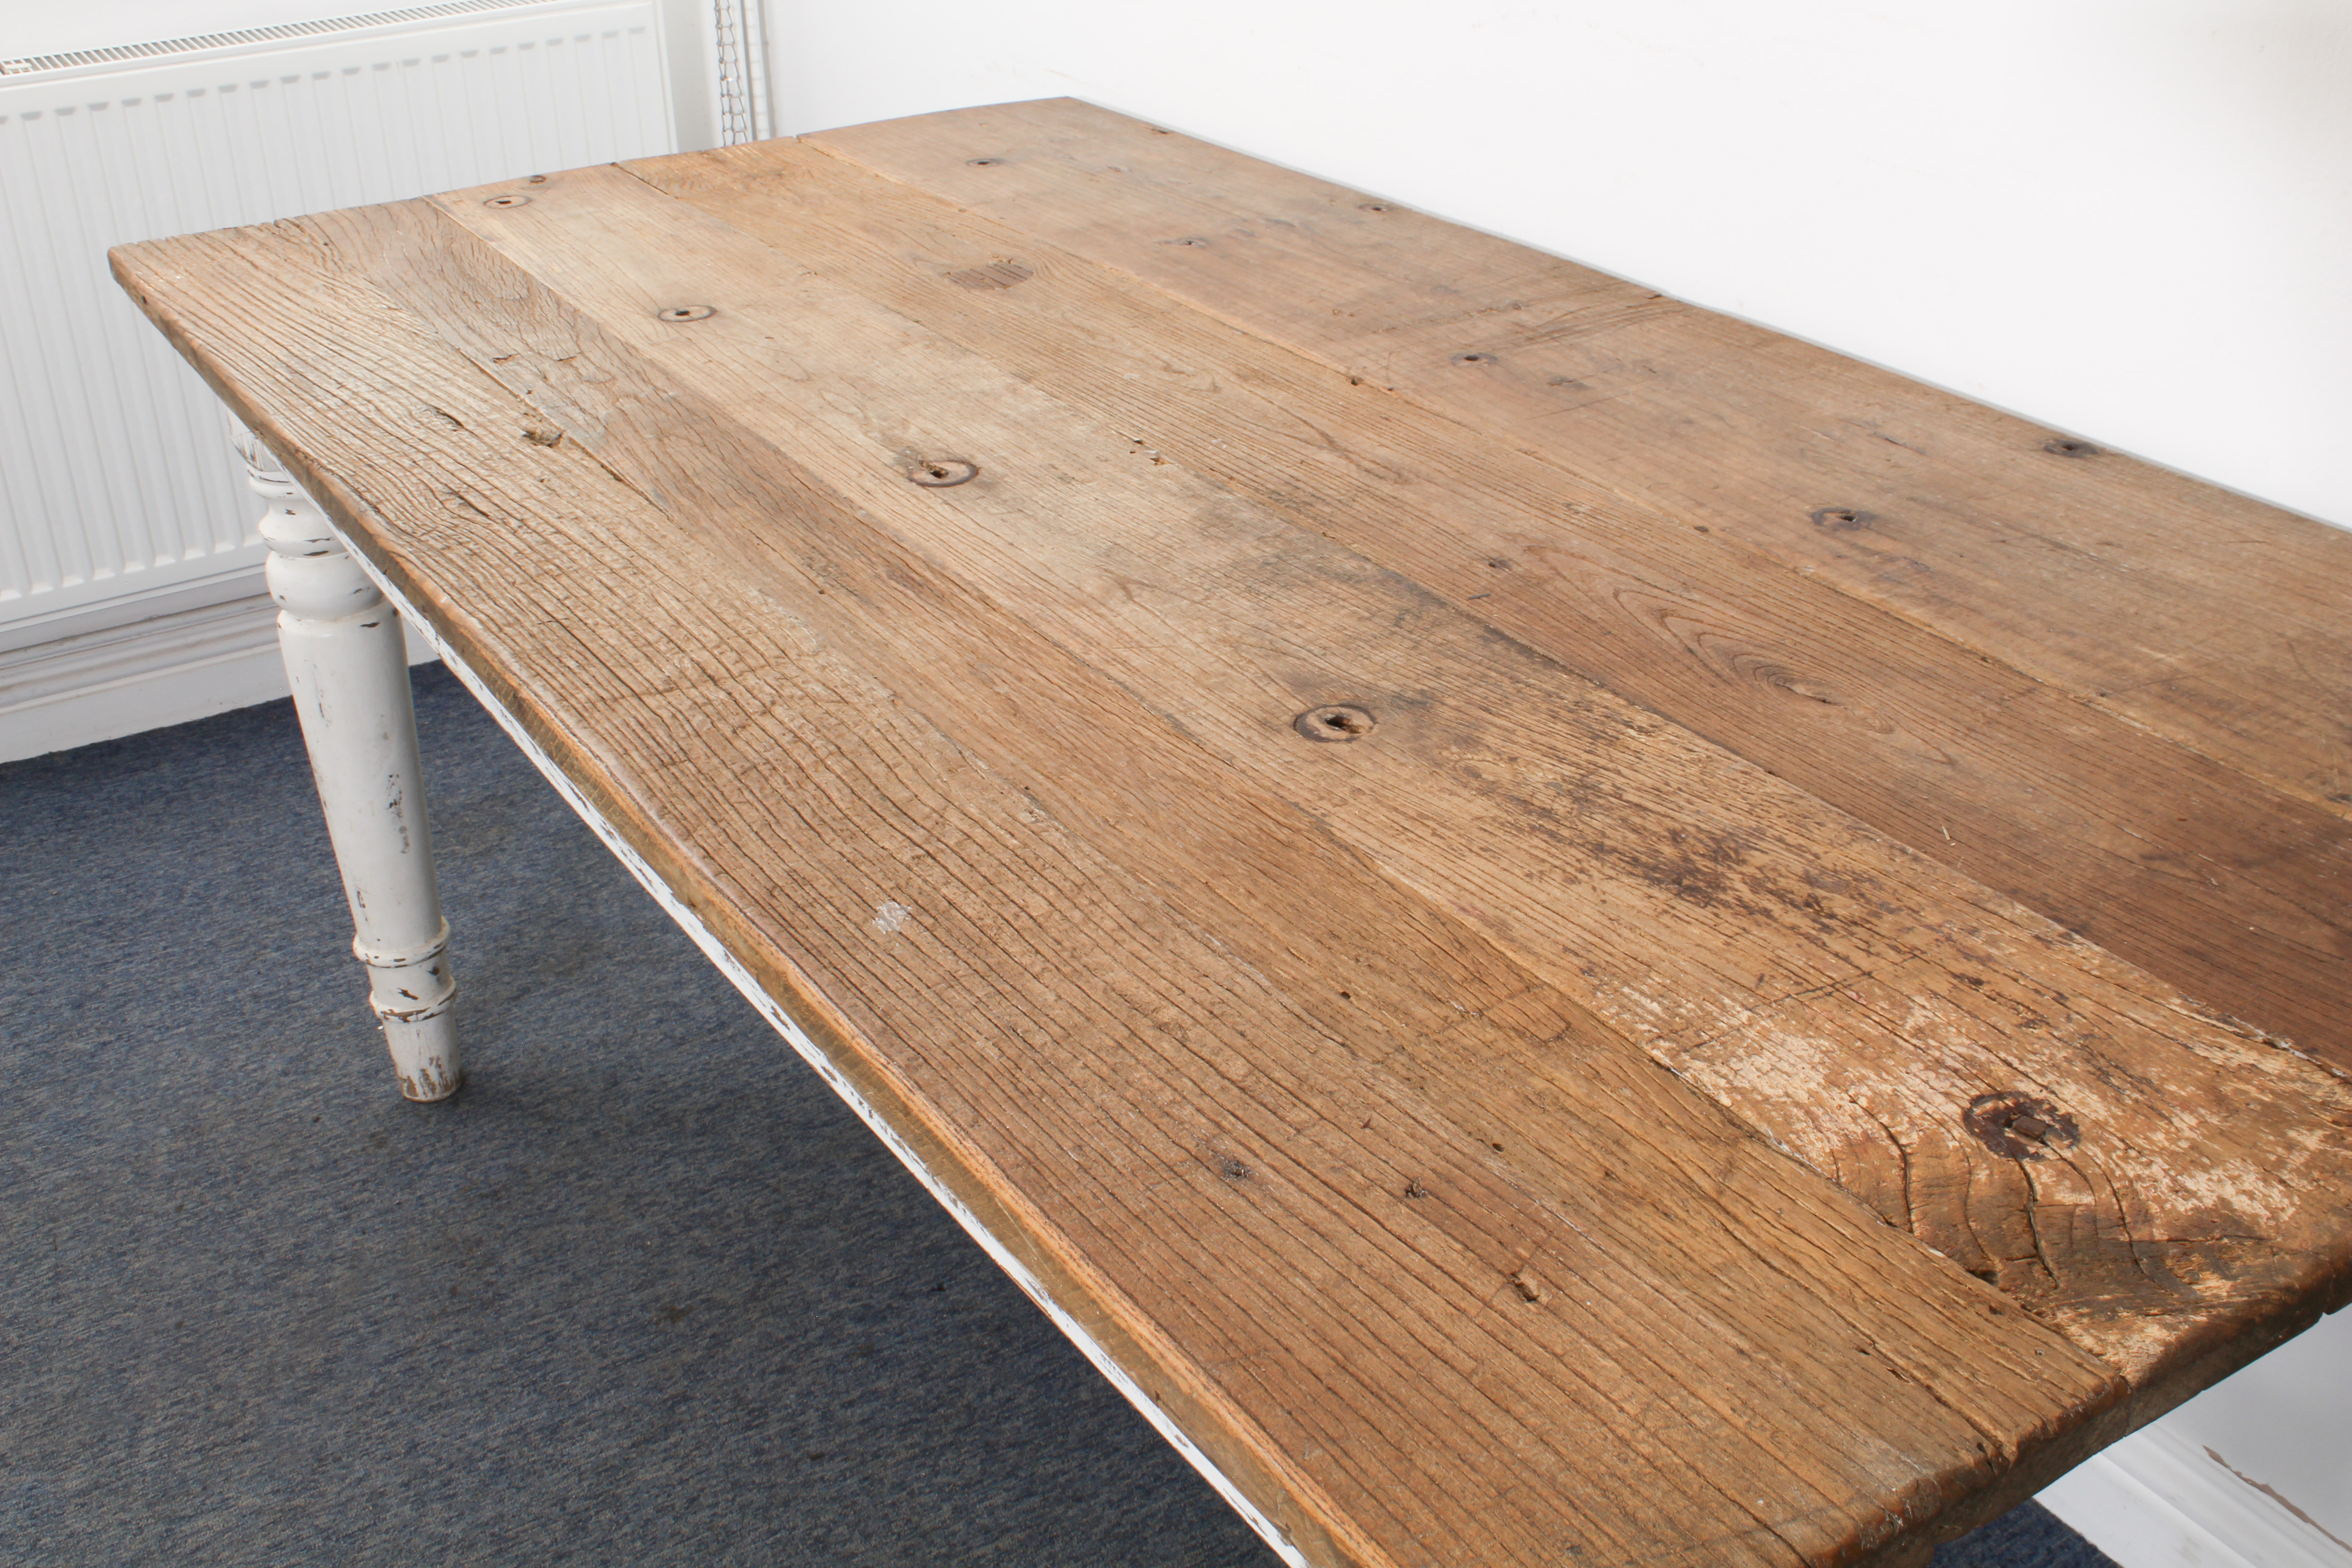 An oak farmhouse kitchen dining table in 19th century style - the rustic, planked top raised on an - Bild 7 aus 7